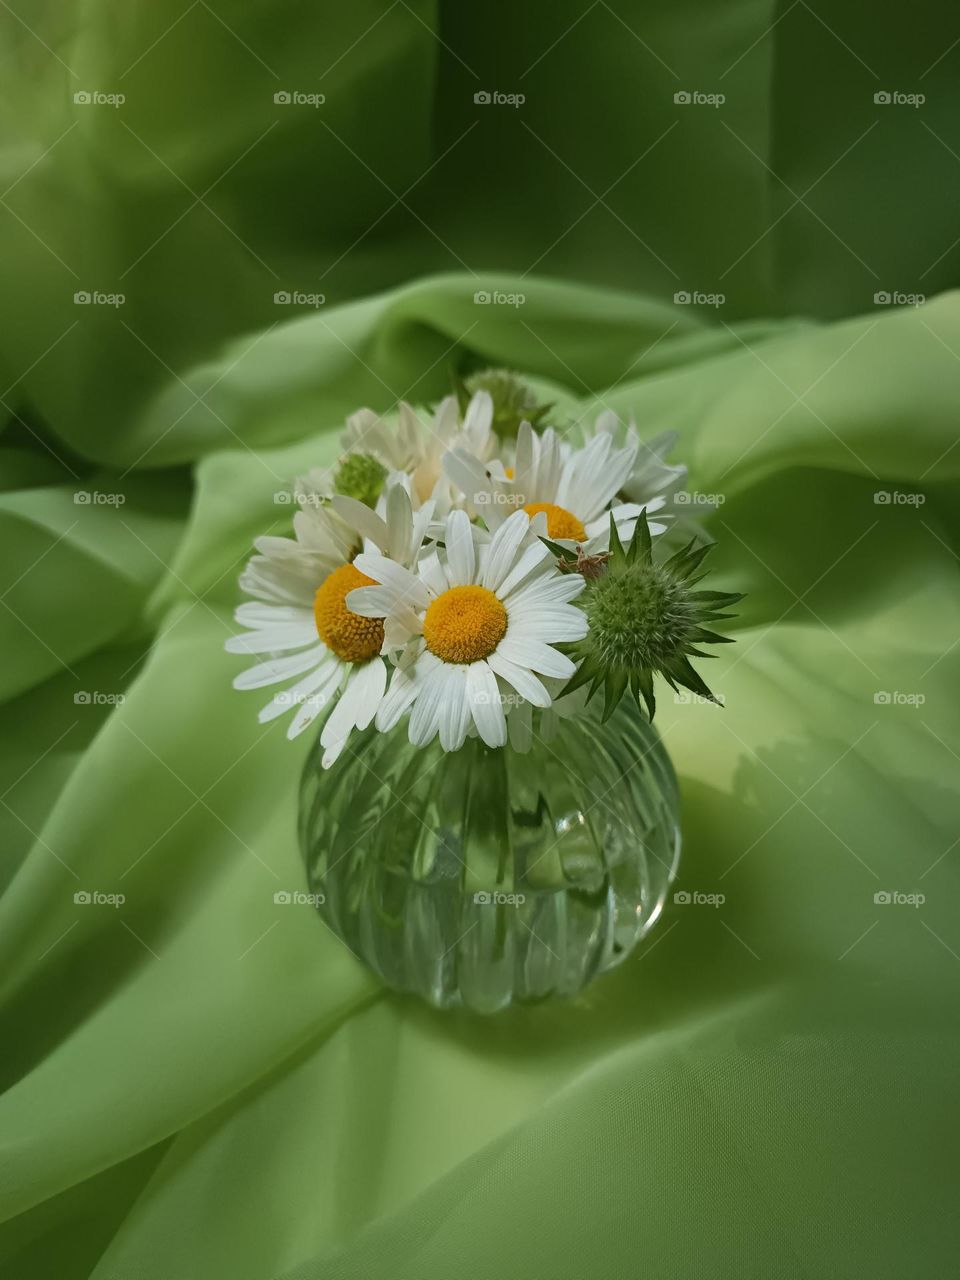 Daisies in a round vase on a green background